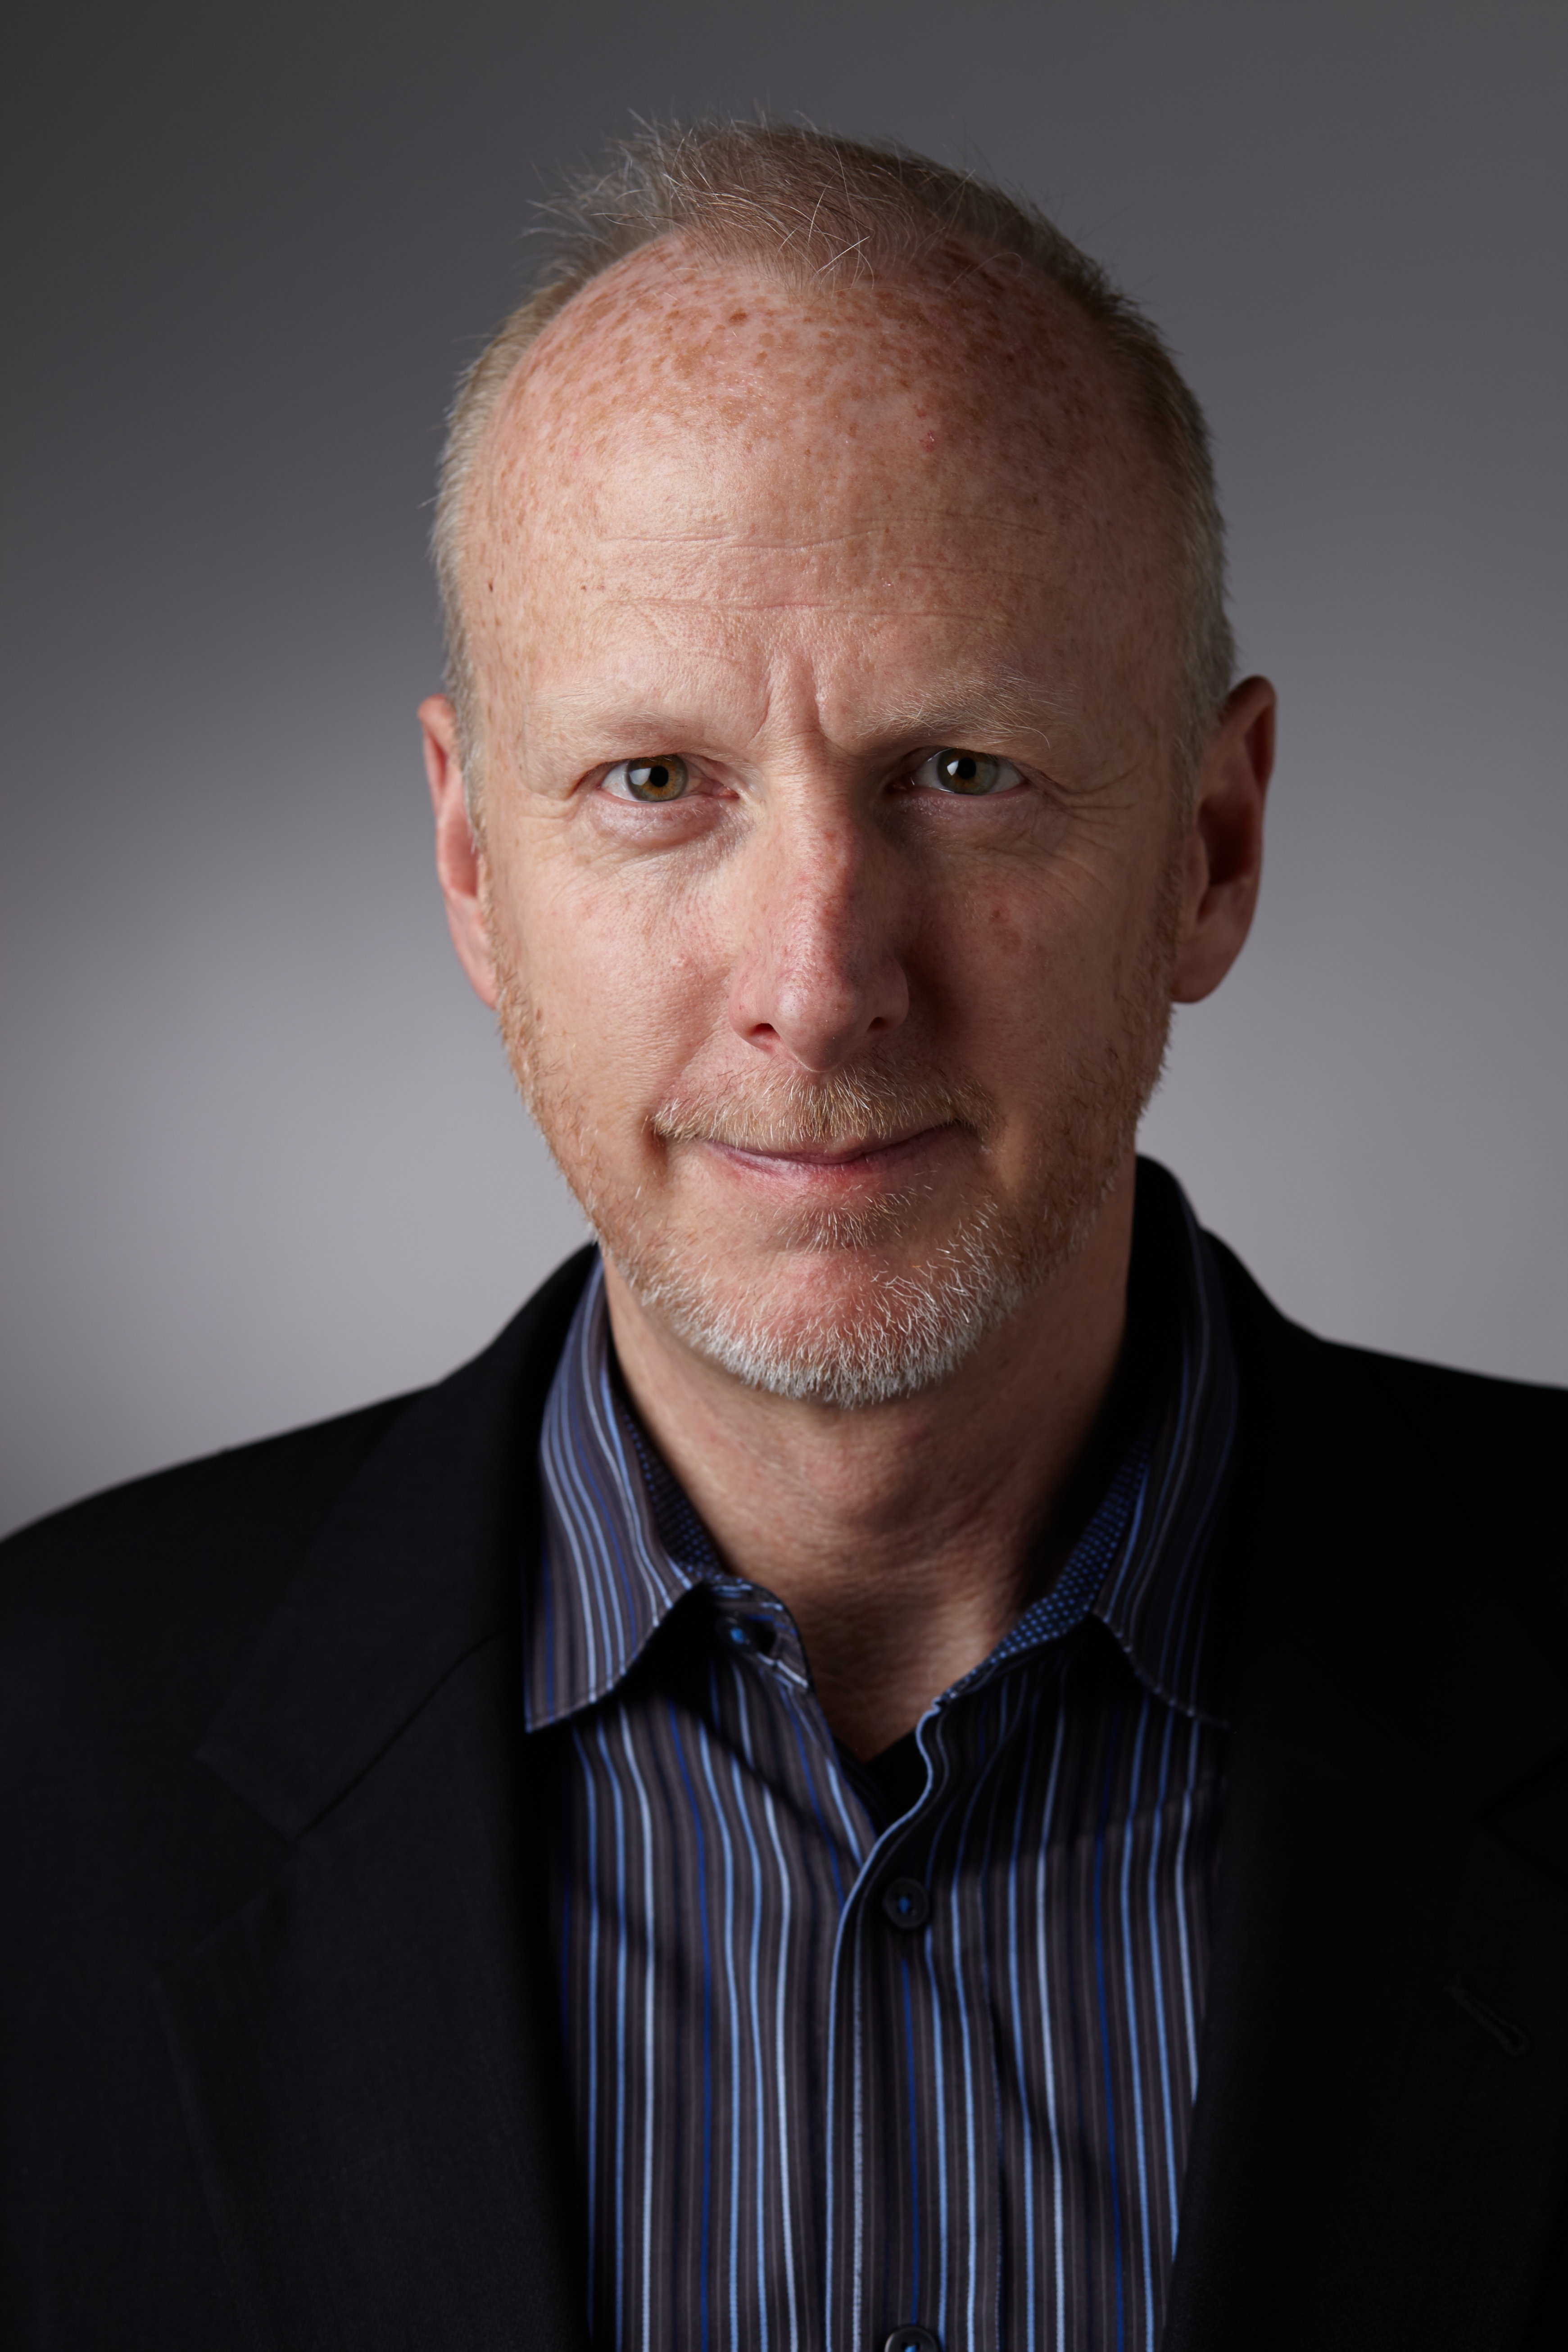 Photo of Chet Pipkin, CEO and founder of Belkin International